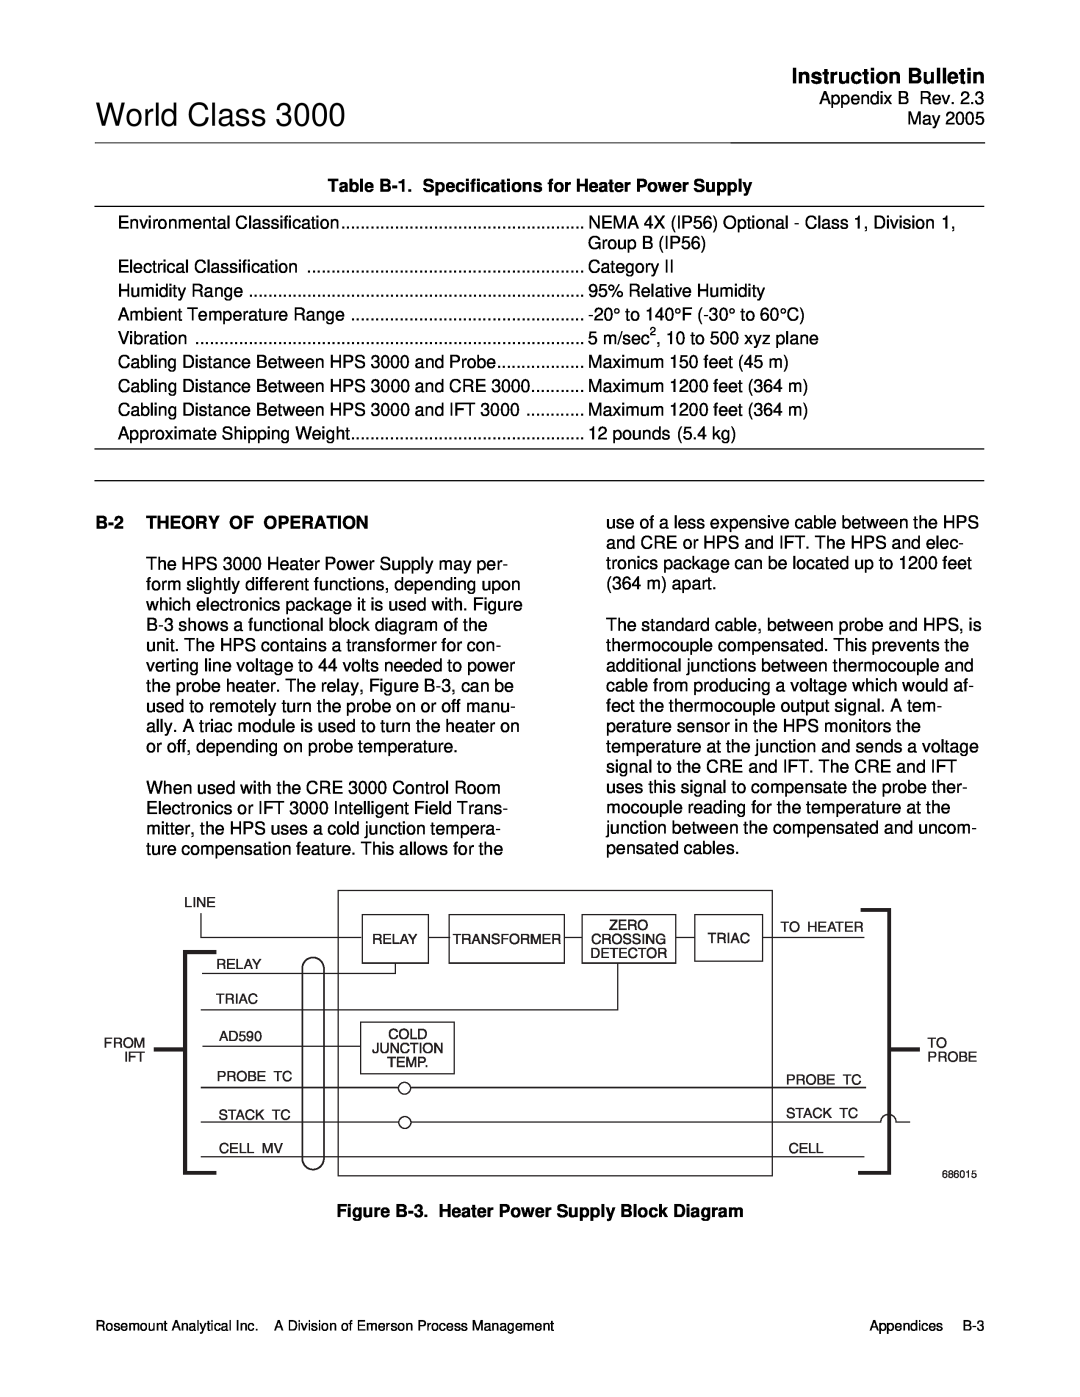 Emerson 3000 World Class, Instruction Bulletin, Table B-1.Specifications for Heater Power Supply, B-2THEORY OF OPERATION 